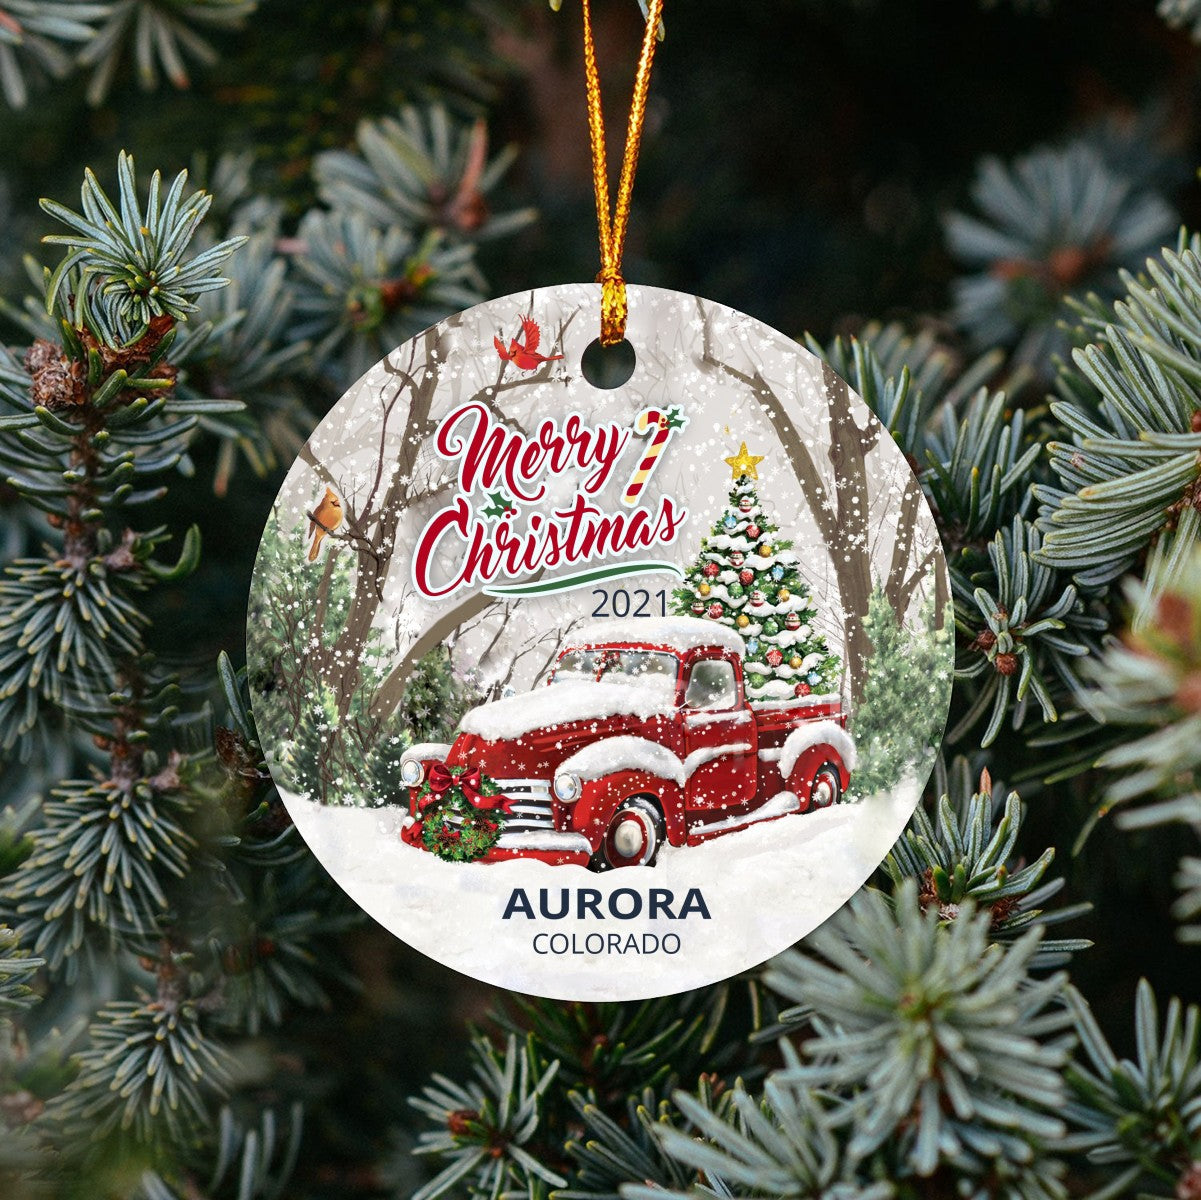 Christmas Tree Ornaments Aurora - Ornament Customize With Name City And State Aurora Colorado CO - Red Truck Xmas Ornaments 3'' Plastic Gift For Family, Friend And Housewarming